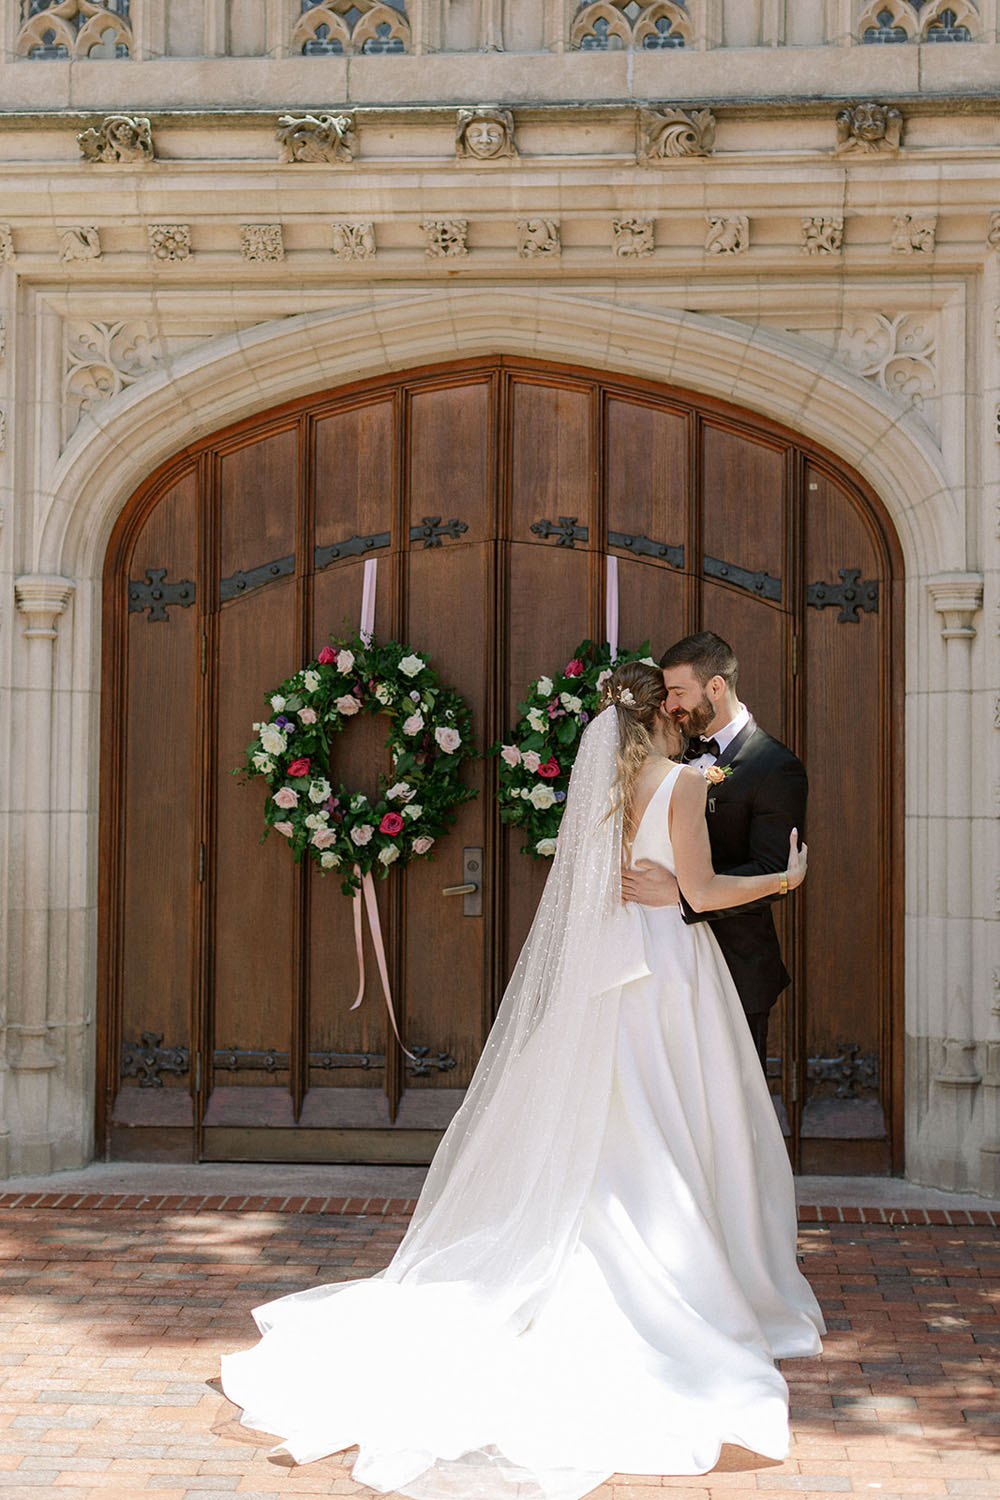 A lush and full of life wedding ceremony in St. Louis crammed with daring shade and chic particulars – 100 Layer Cake